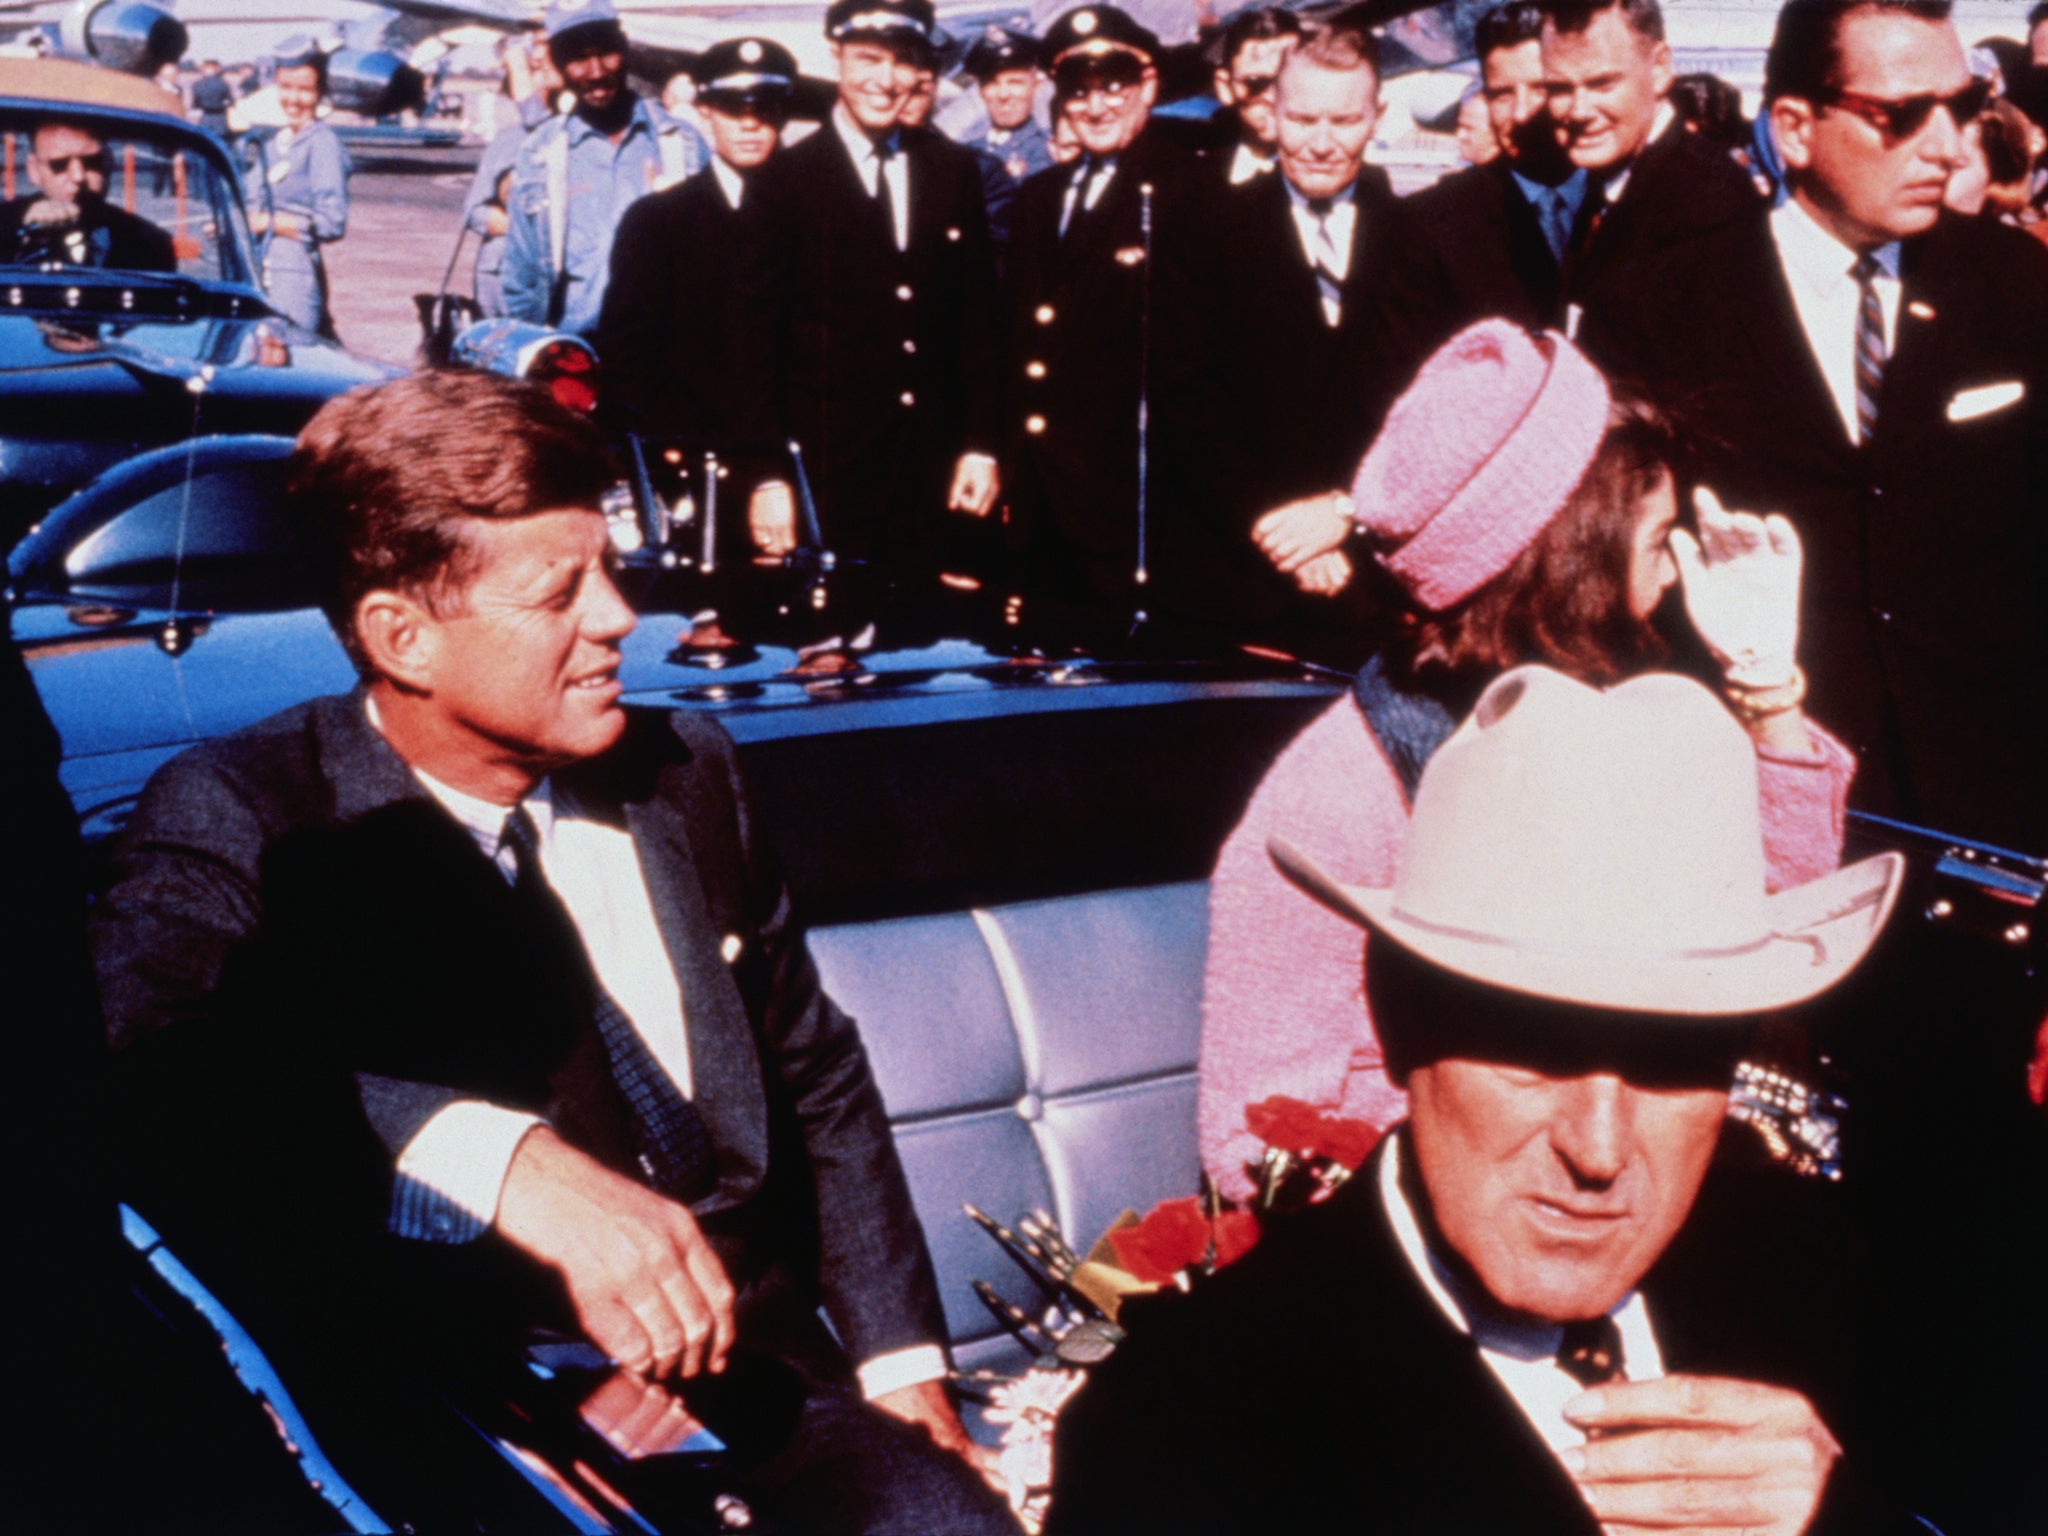 &#13;
John F Kennedy was assassinated on 22 November 1963 as he rode in a motorcade through downtown Dallas (Getty)&#13;